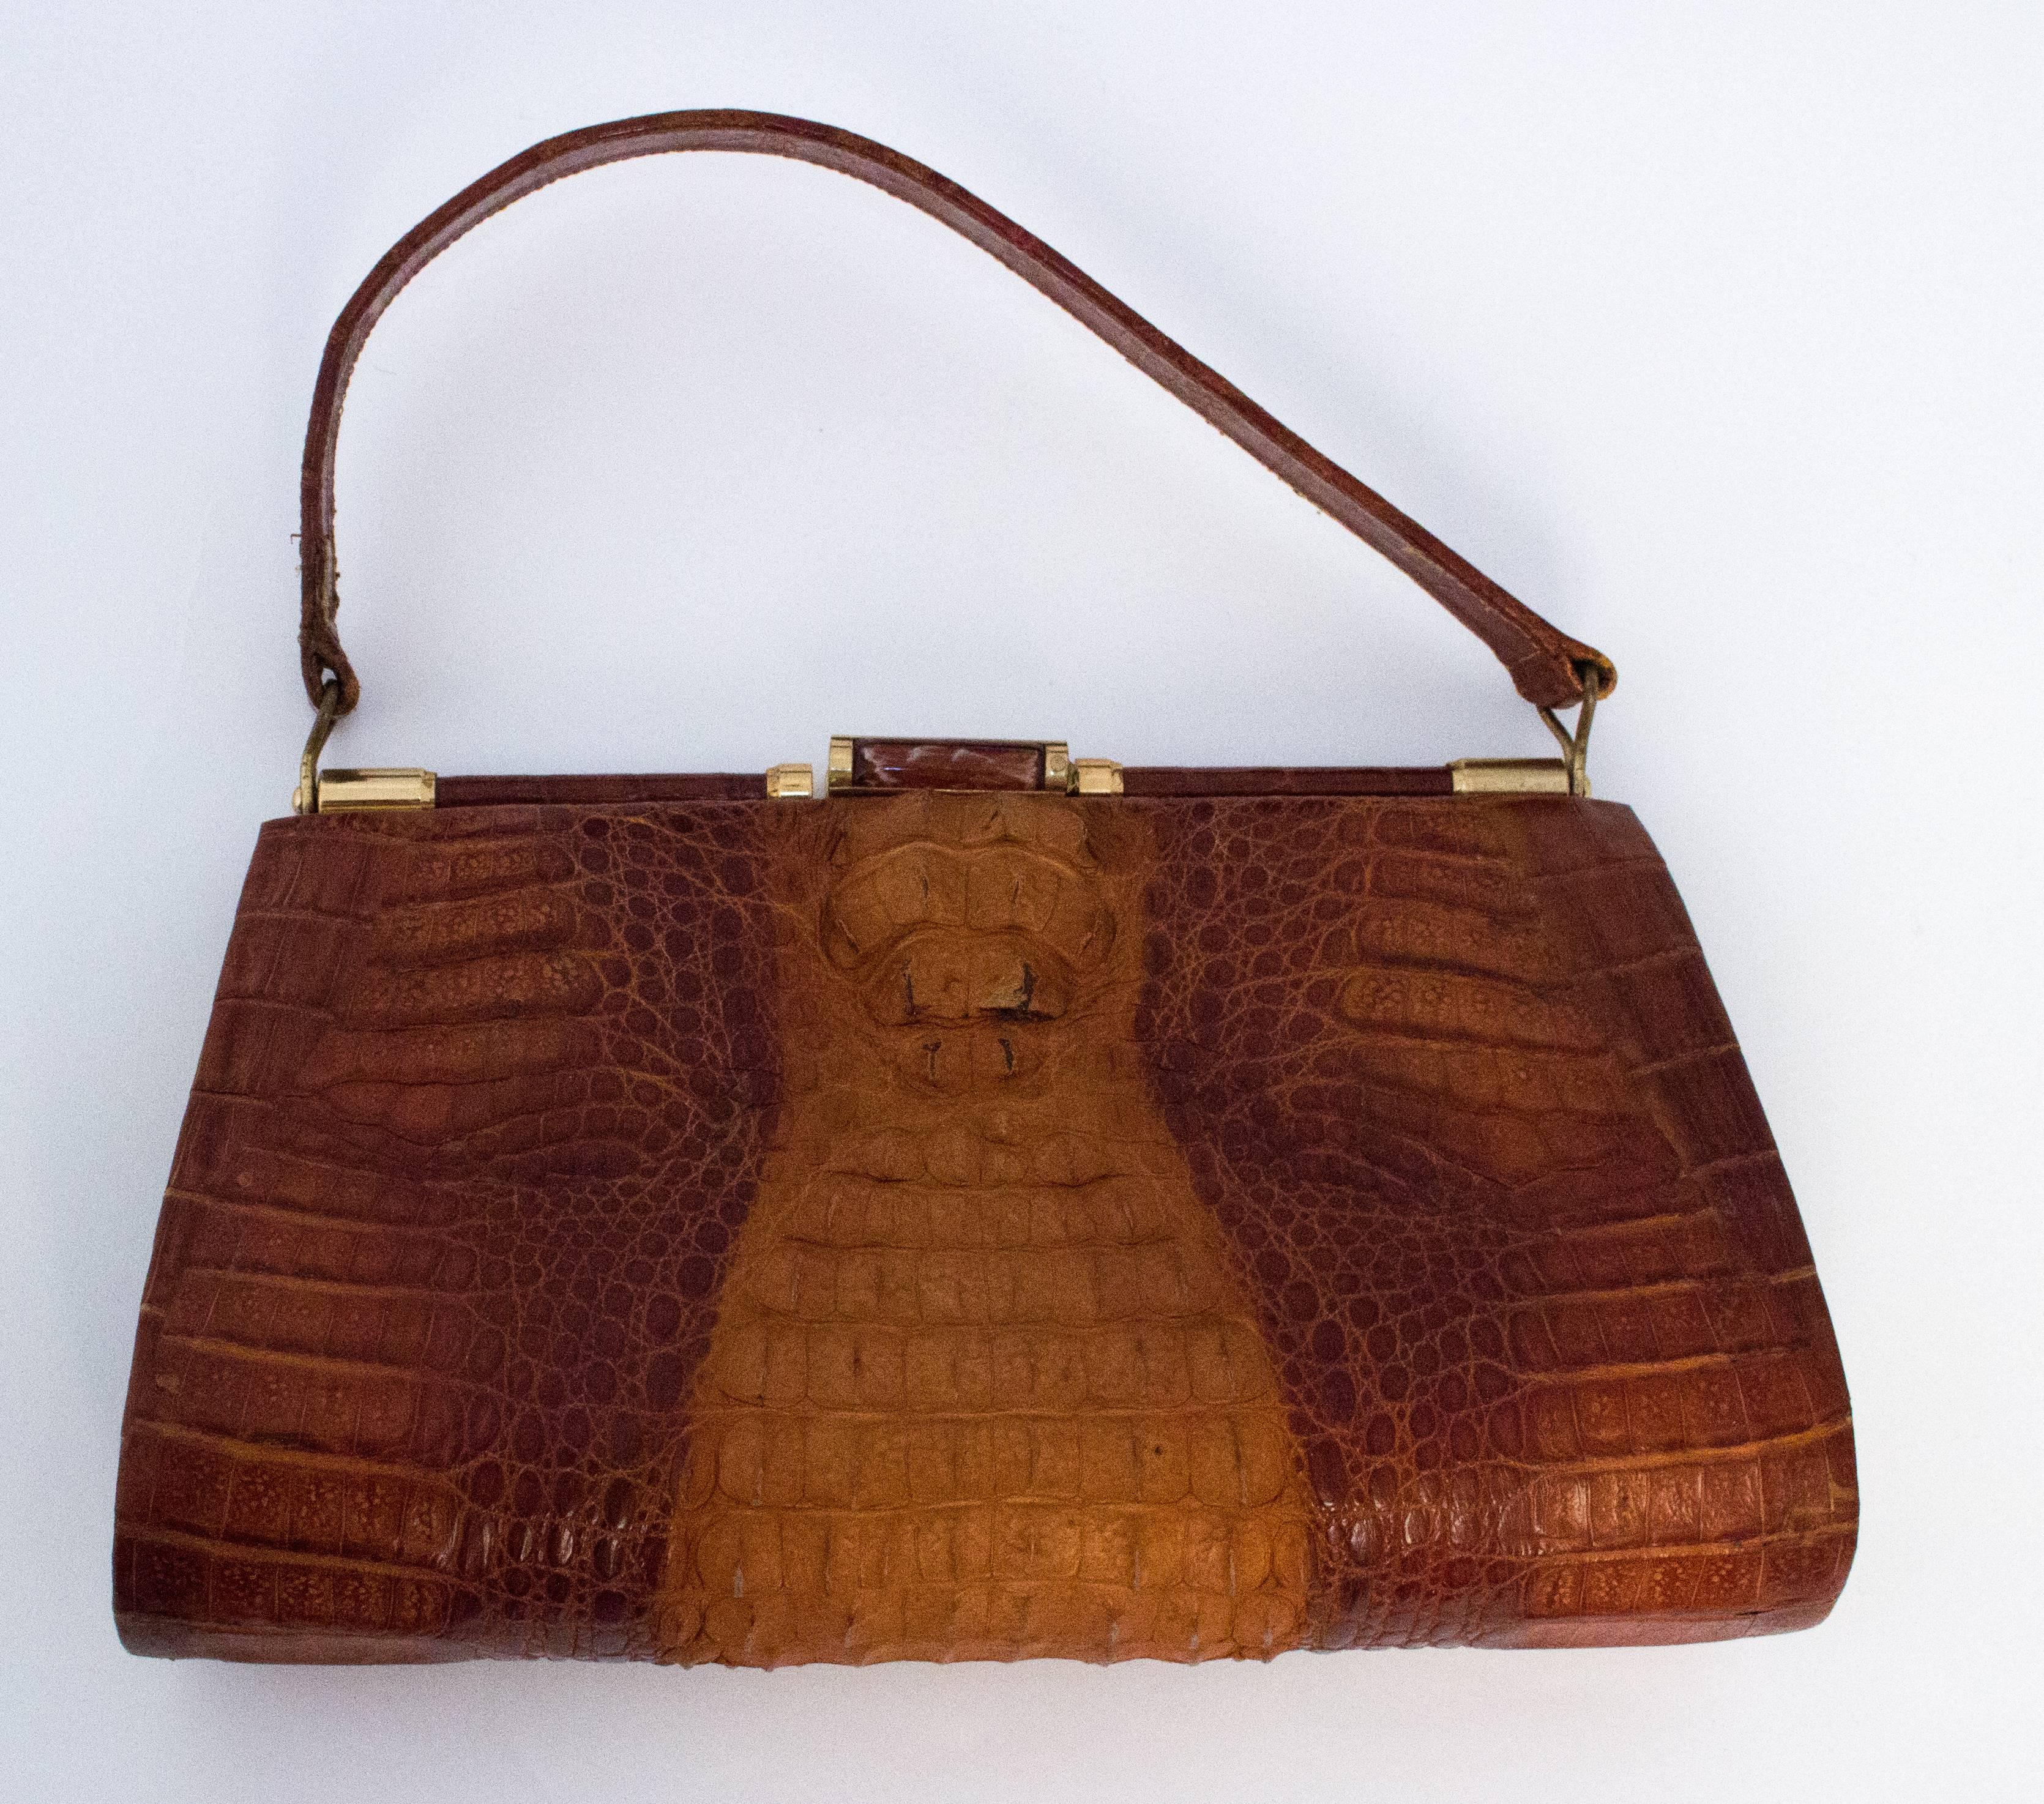 50s Hornback Alligator Handbag. Gold toned hardware. Three interior compartments, one with a zipper. 

Measurements: 

Width: 9